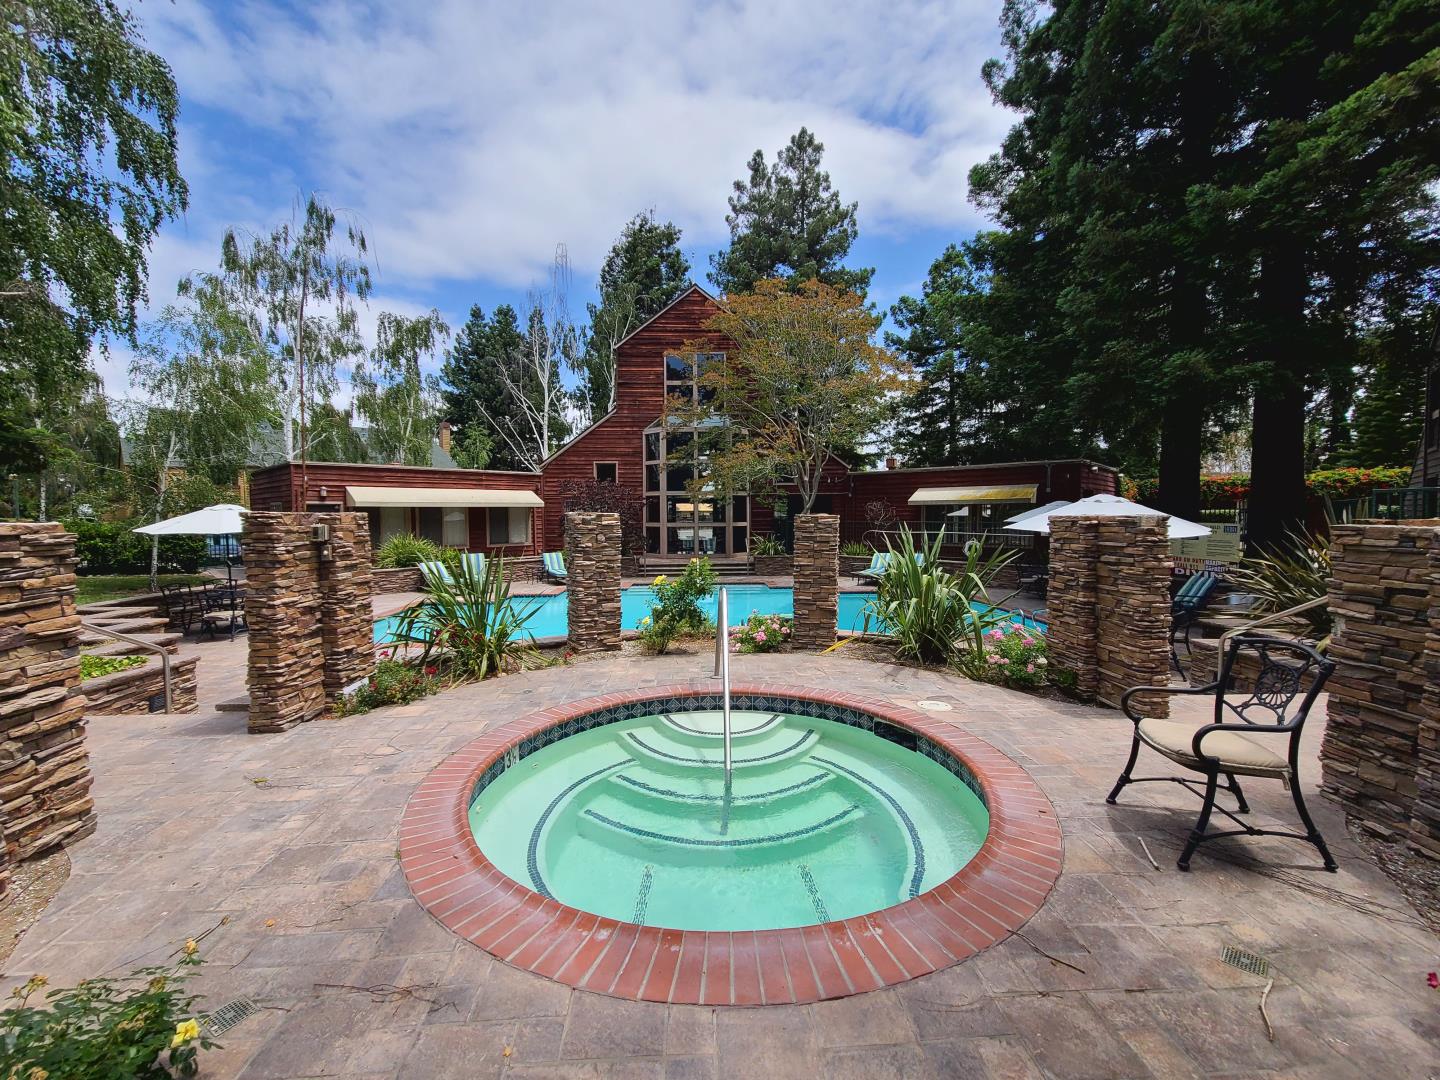 a swimming pool with an outdoor seating yard and barbeque oven